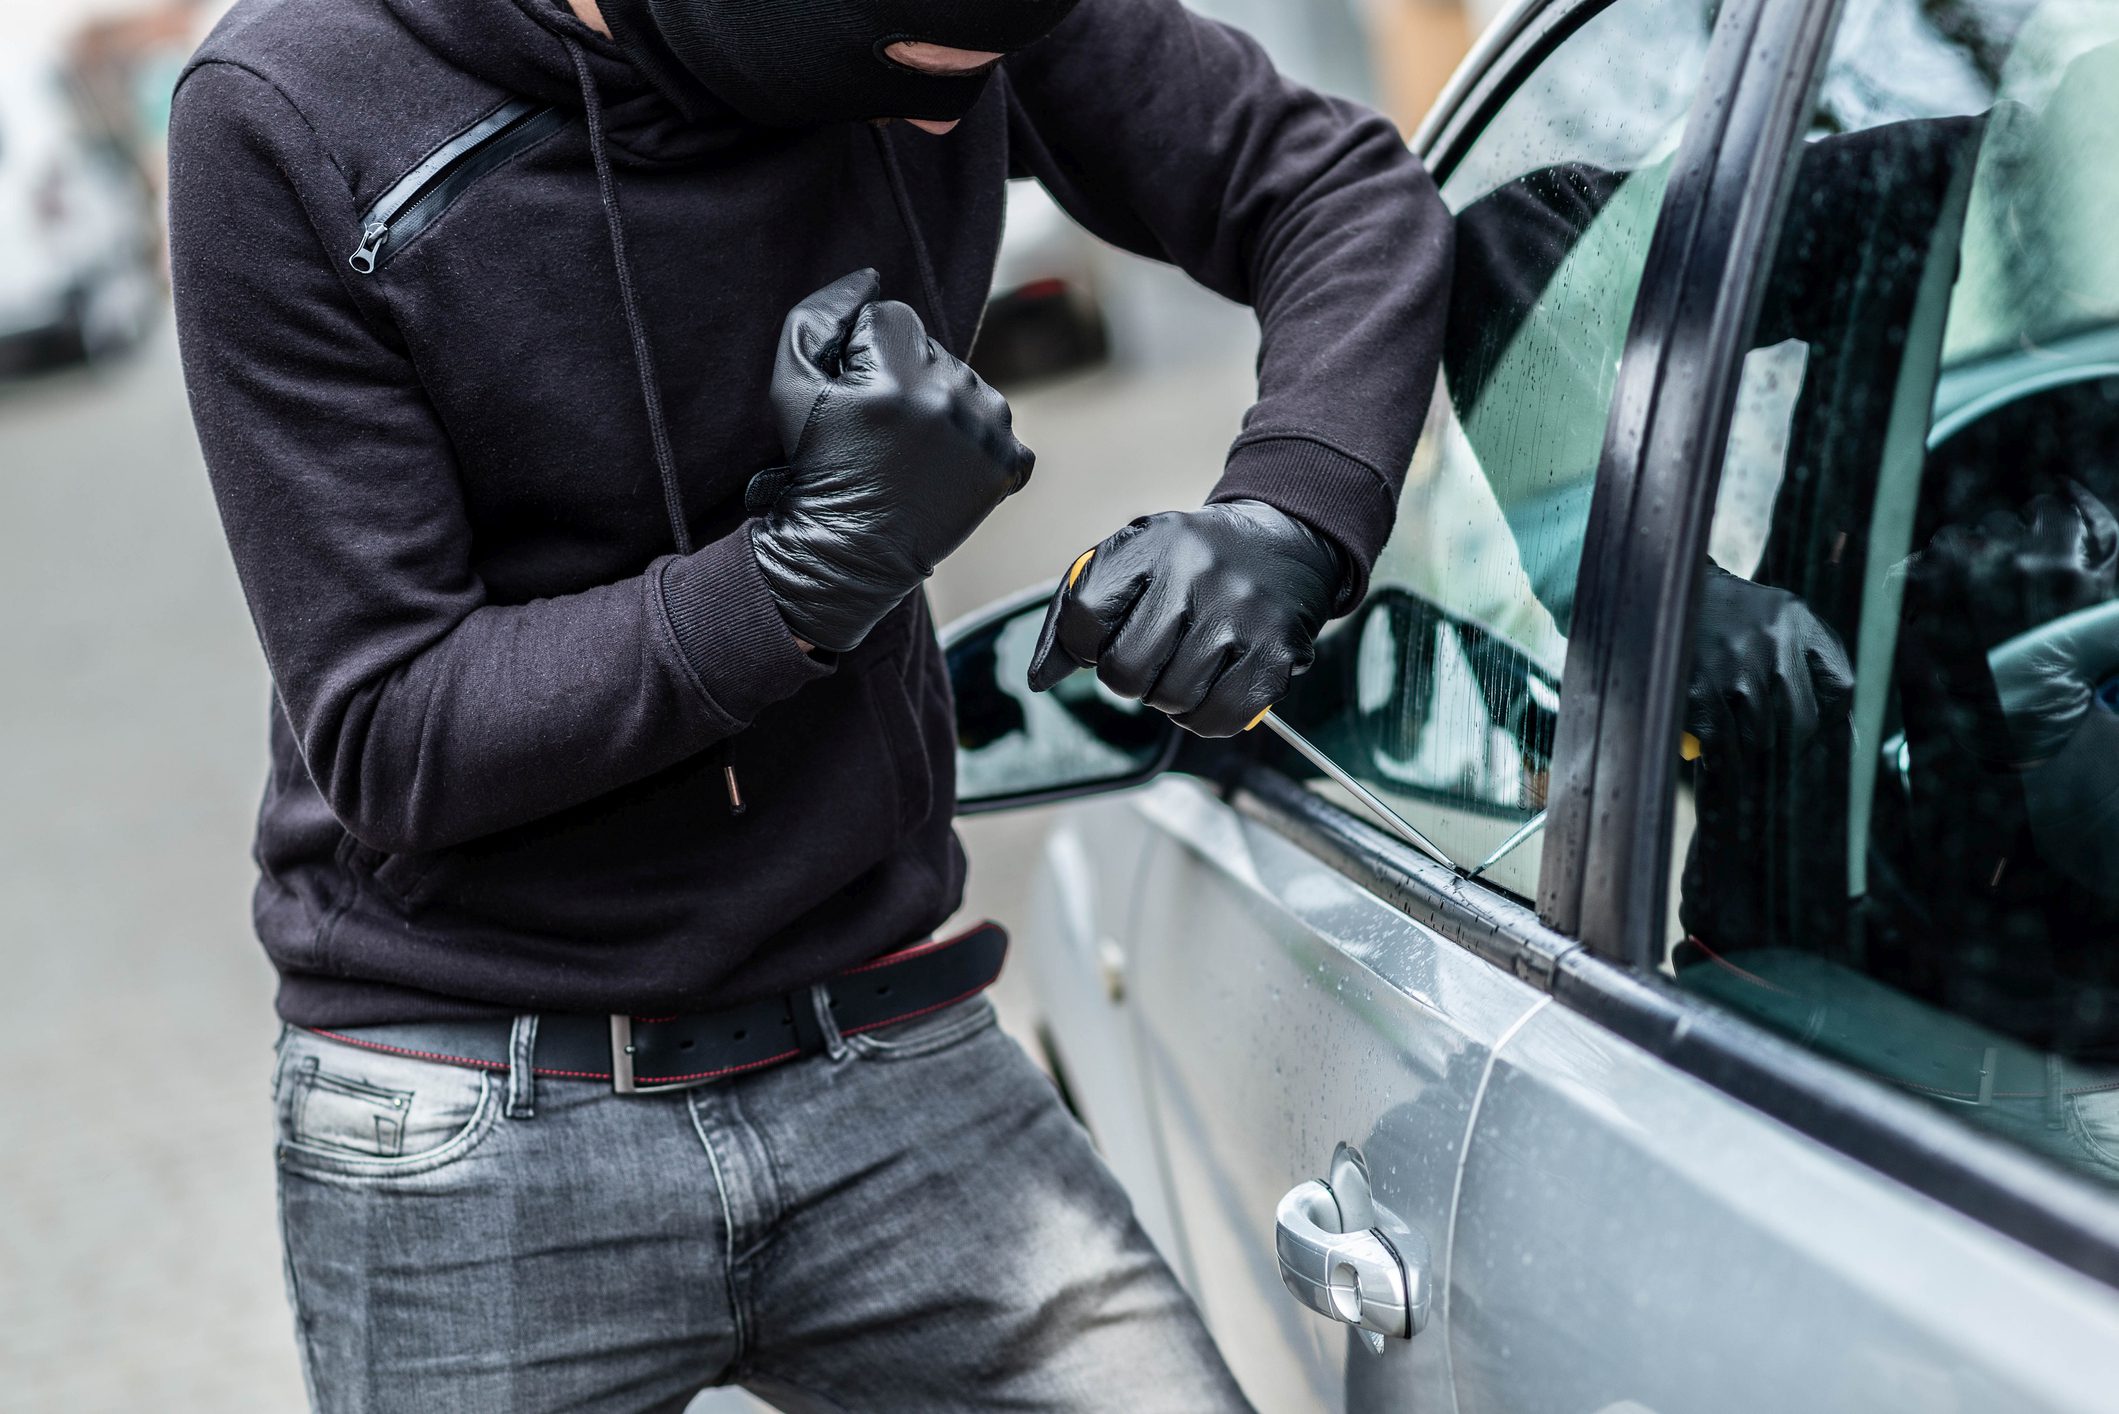 Vehicle Thefts on the Rise, What is Councilman West Doing About it?